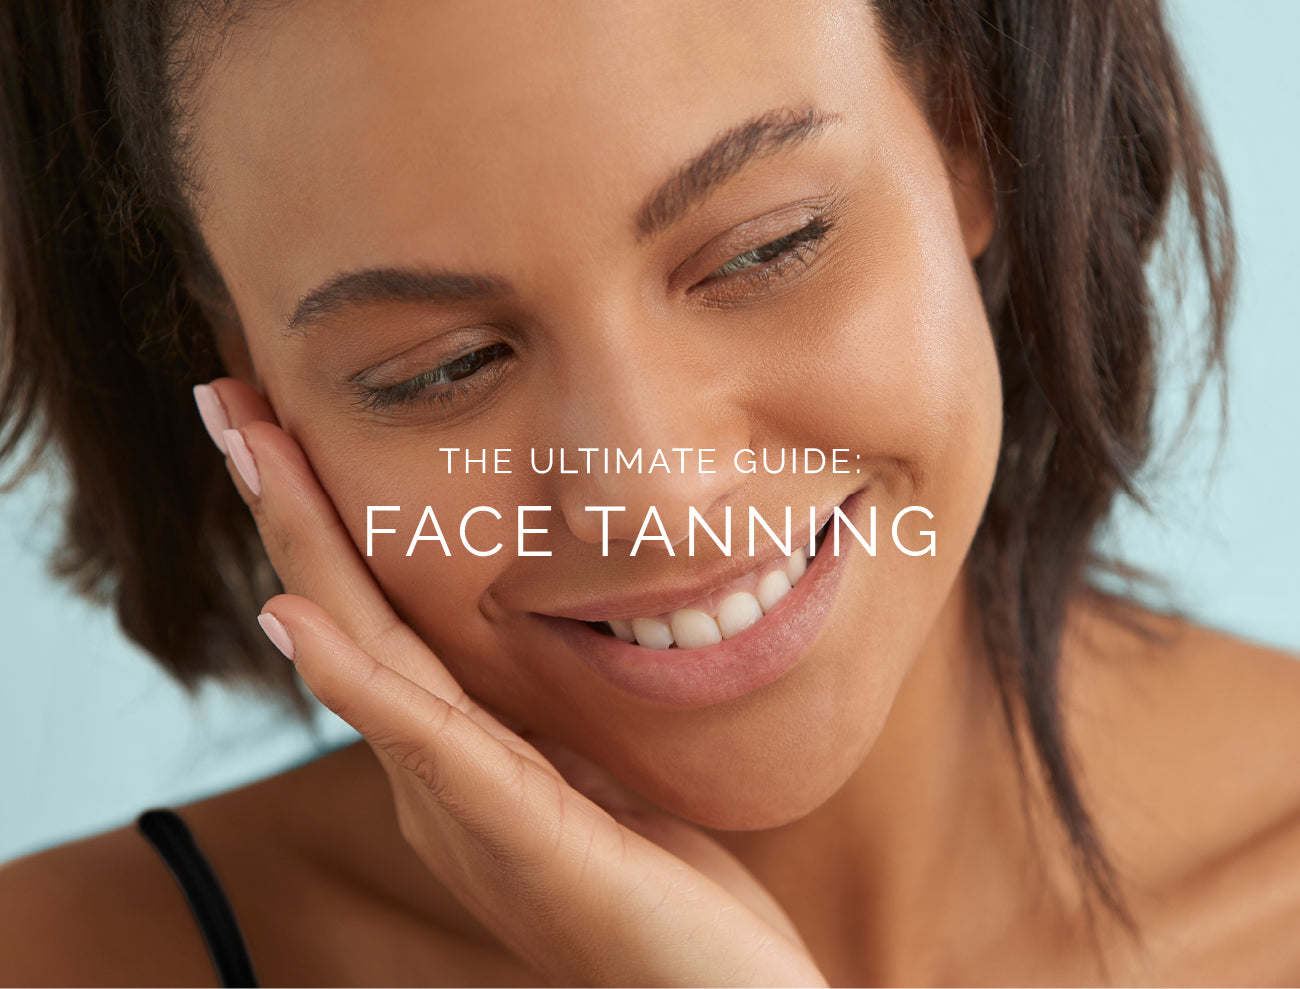 The Ultimate Guide to Face Tanning